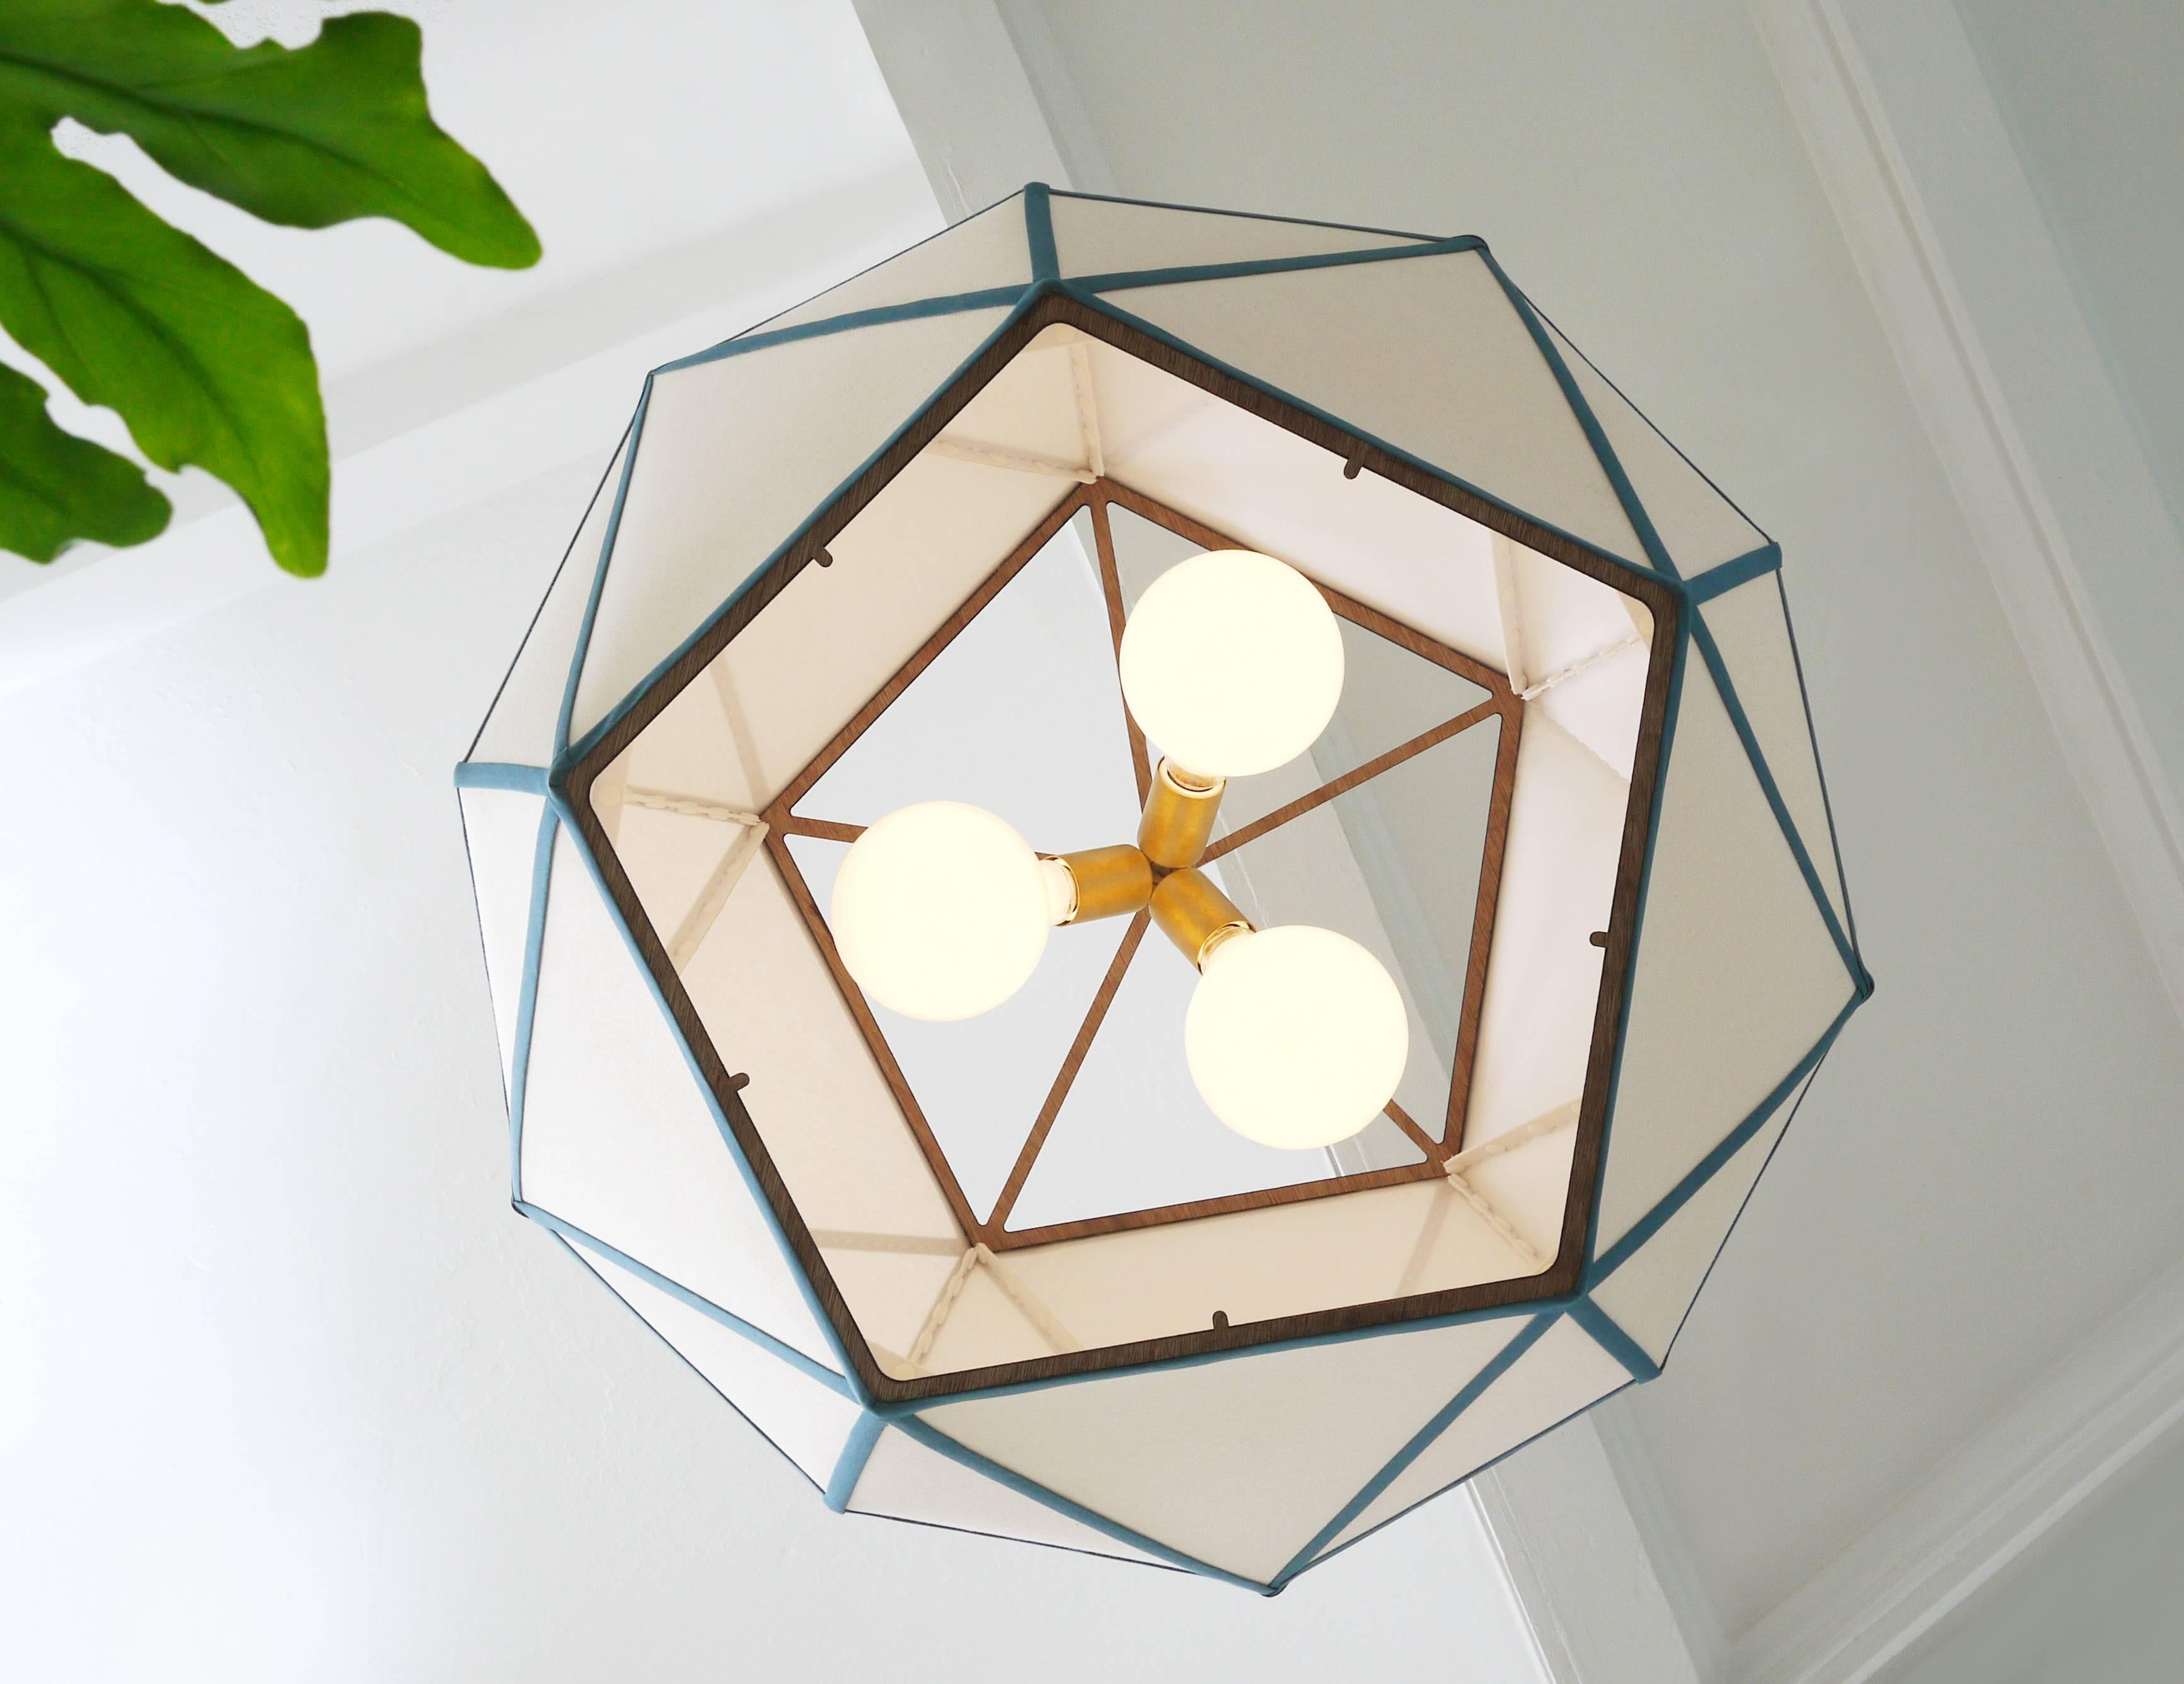 Crisp geometric forms rendered in hand riveted die-cut linen, laser cut plywood and brushed brass.

Features three 60 watt incandescent lightbulbs and an included optional diffuser.

Available in six standard trims. Shown here in ocean.